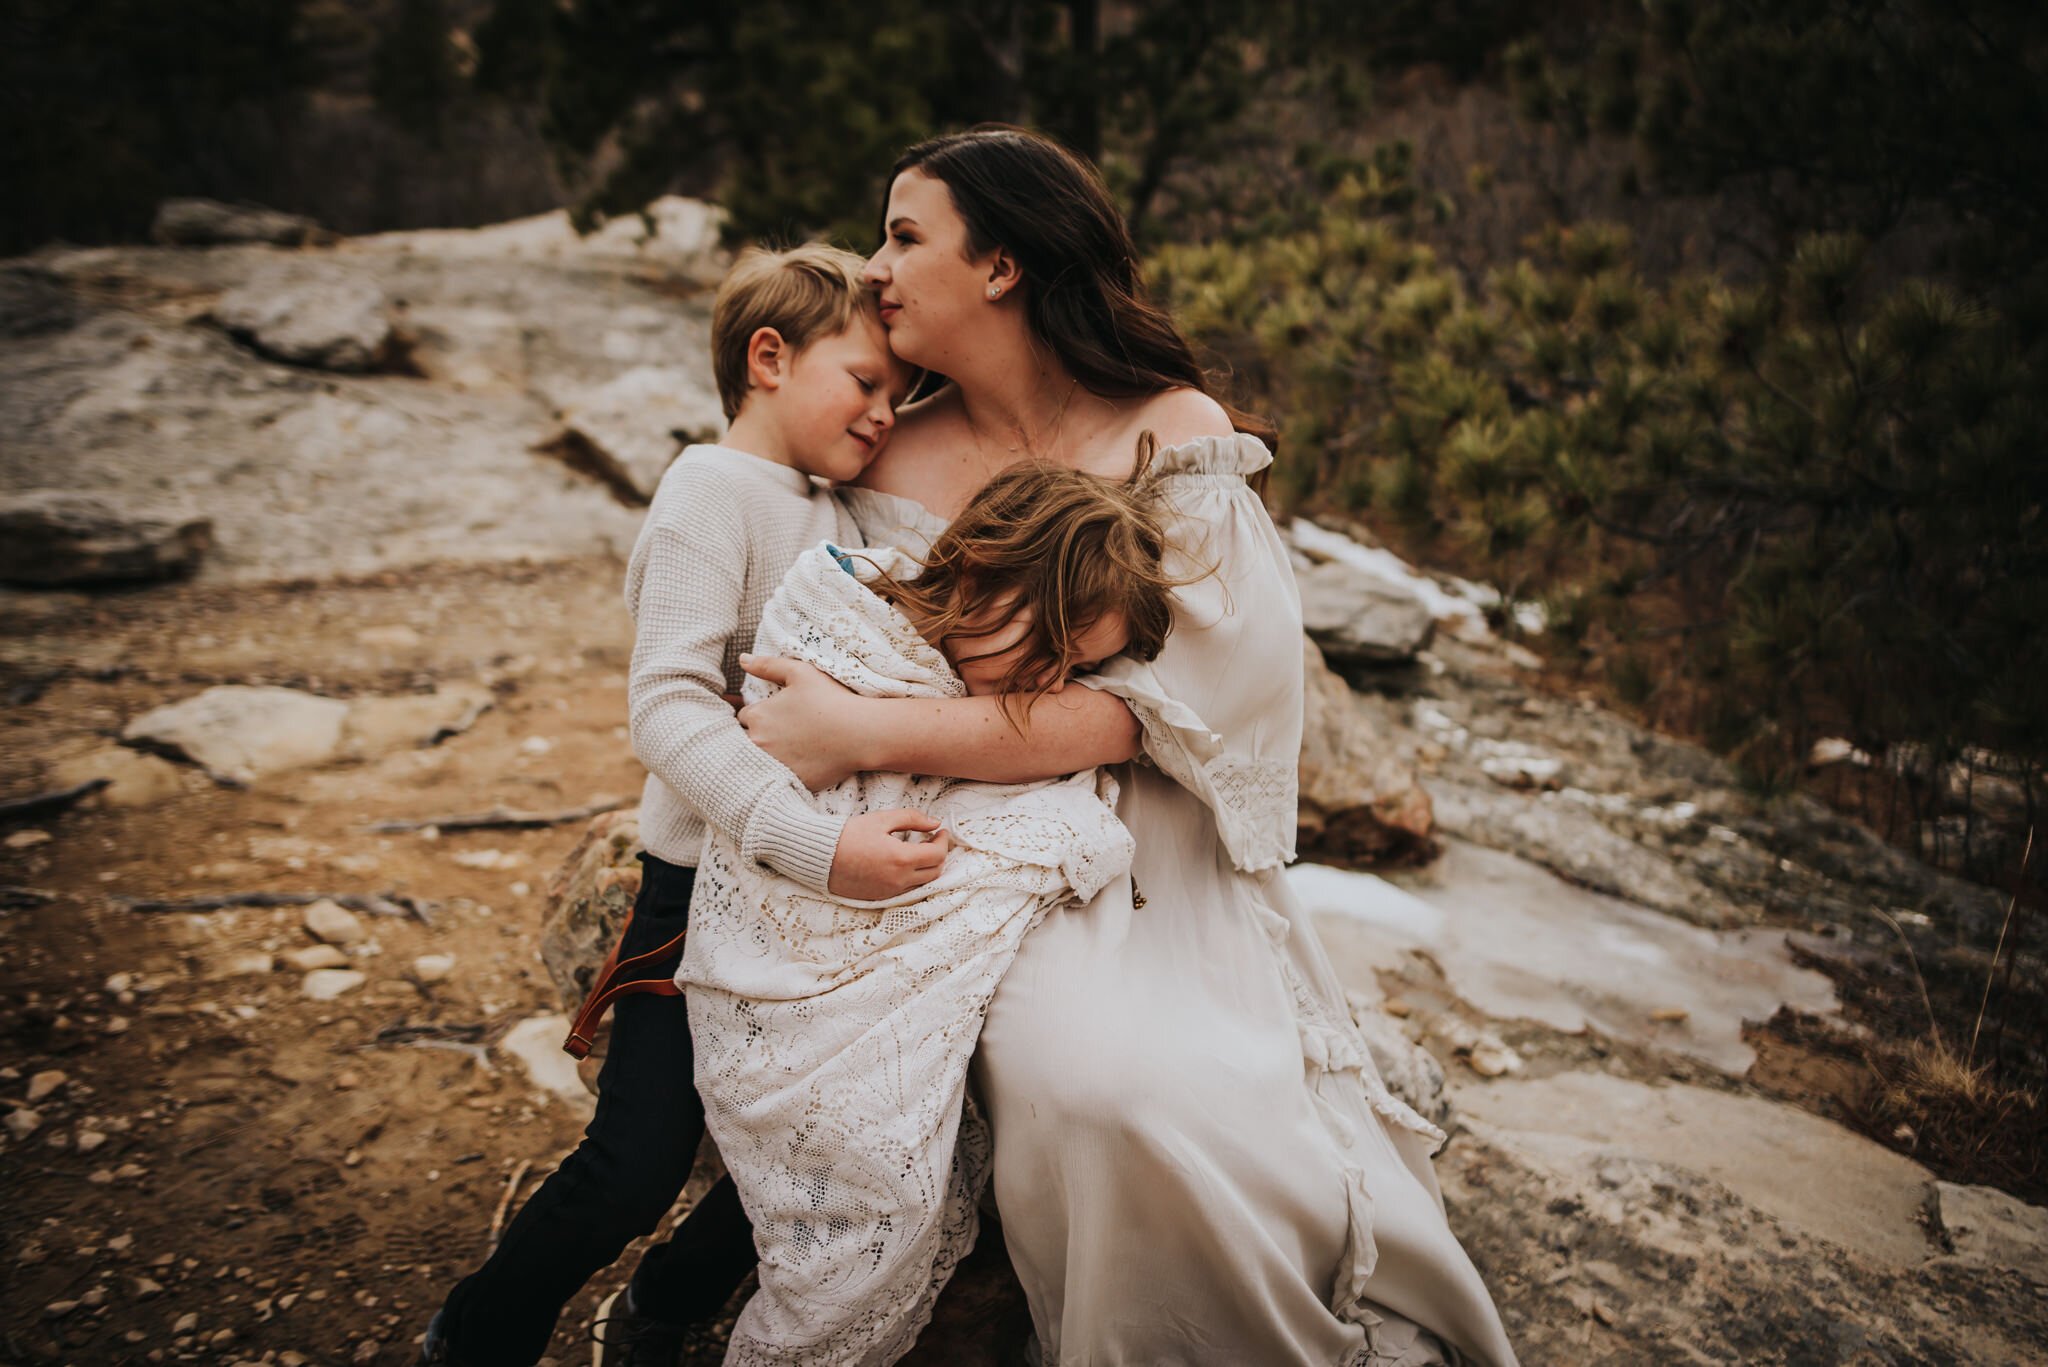 Miller+Family+Session+Mentorship+Colorado+Springs+Colorado+Sunset+Ute+Valley+Park+Mountains+Fields+Mom+Dad+Son+Daughter+Baby+Wild+Prairie+Photography-20-2020.jpeg